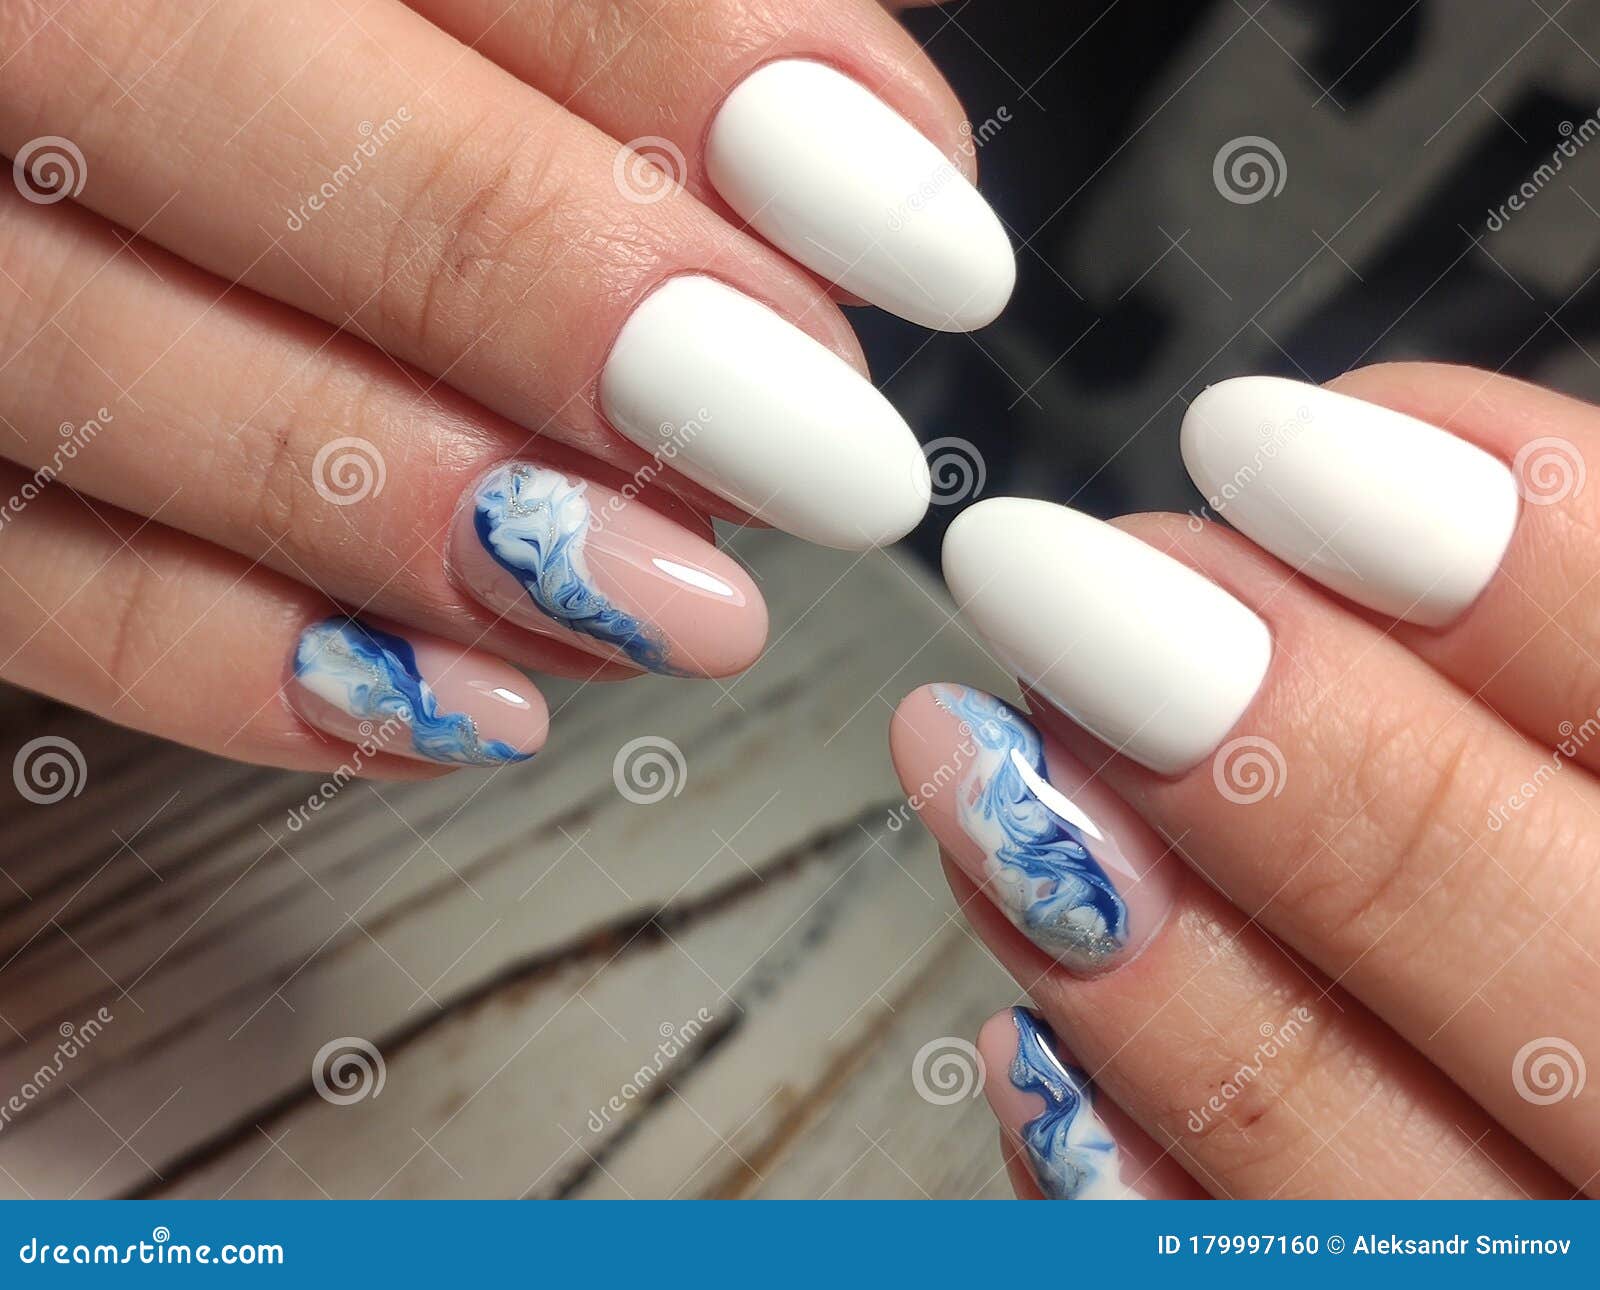 3. "The Best Nail Art Designs for Perfectly Manicured Nails" - wide 1